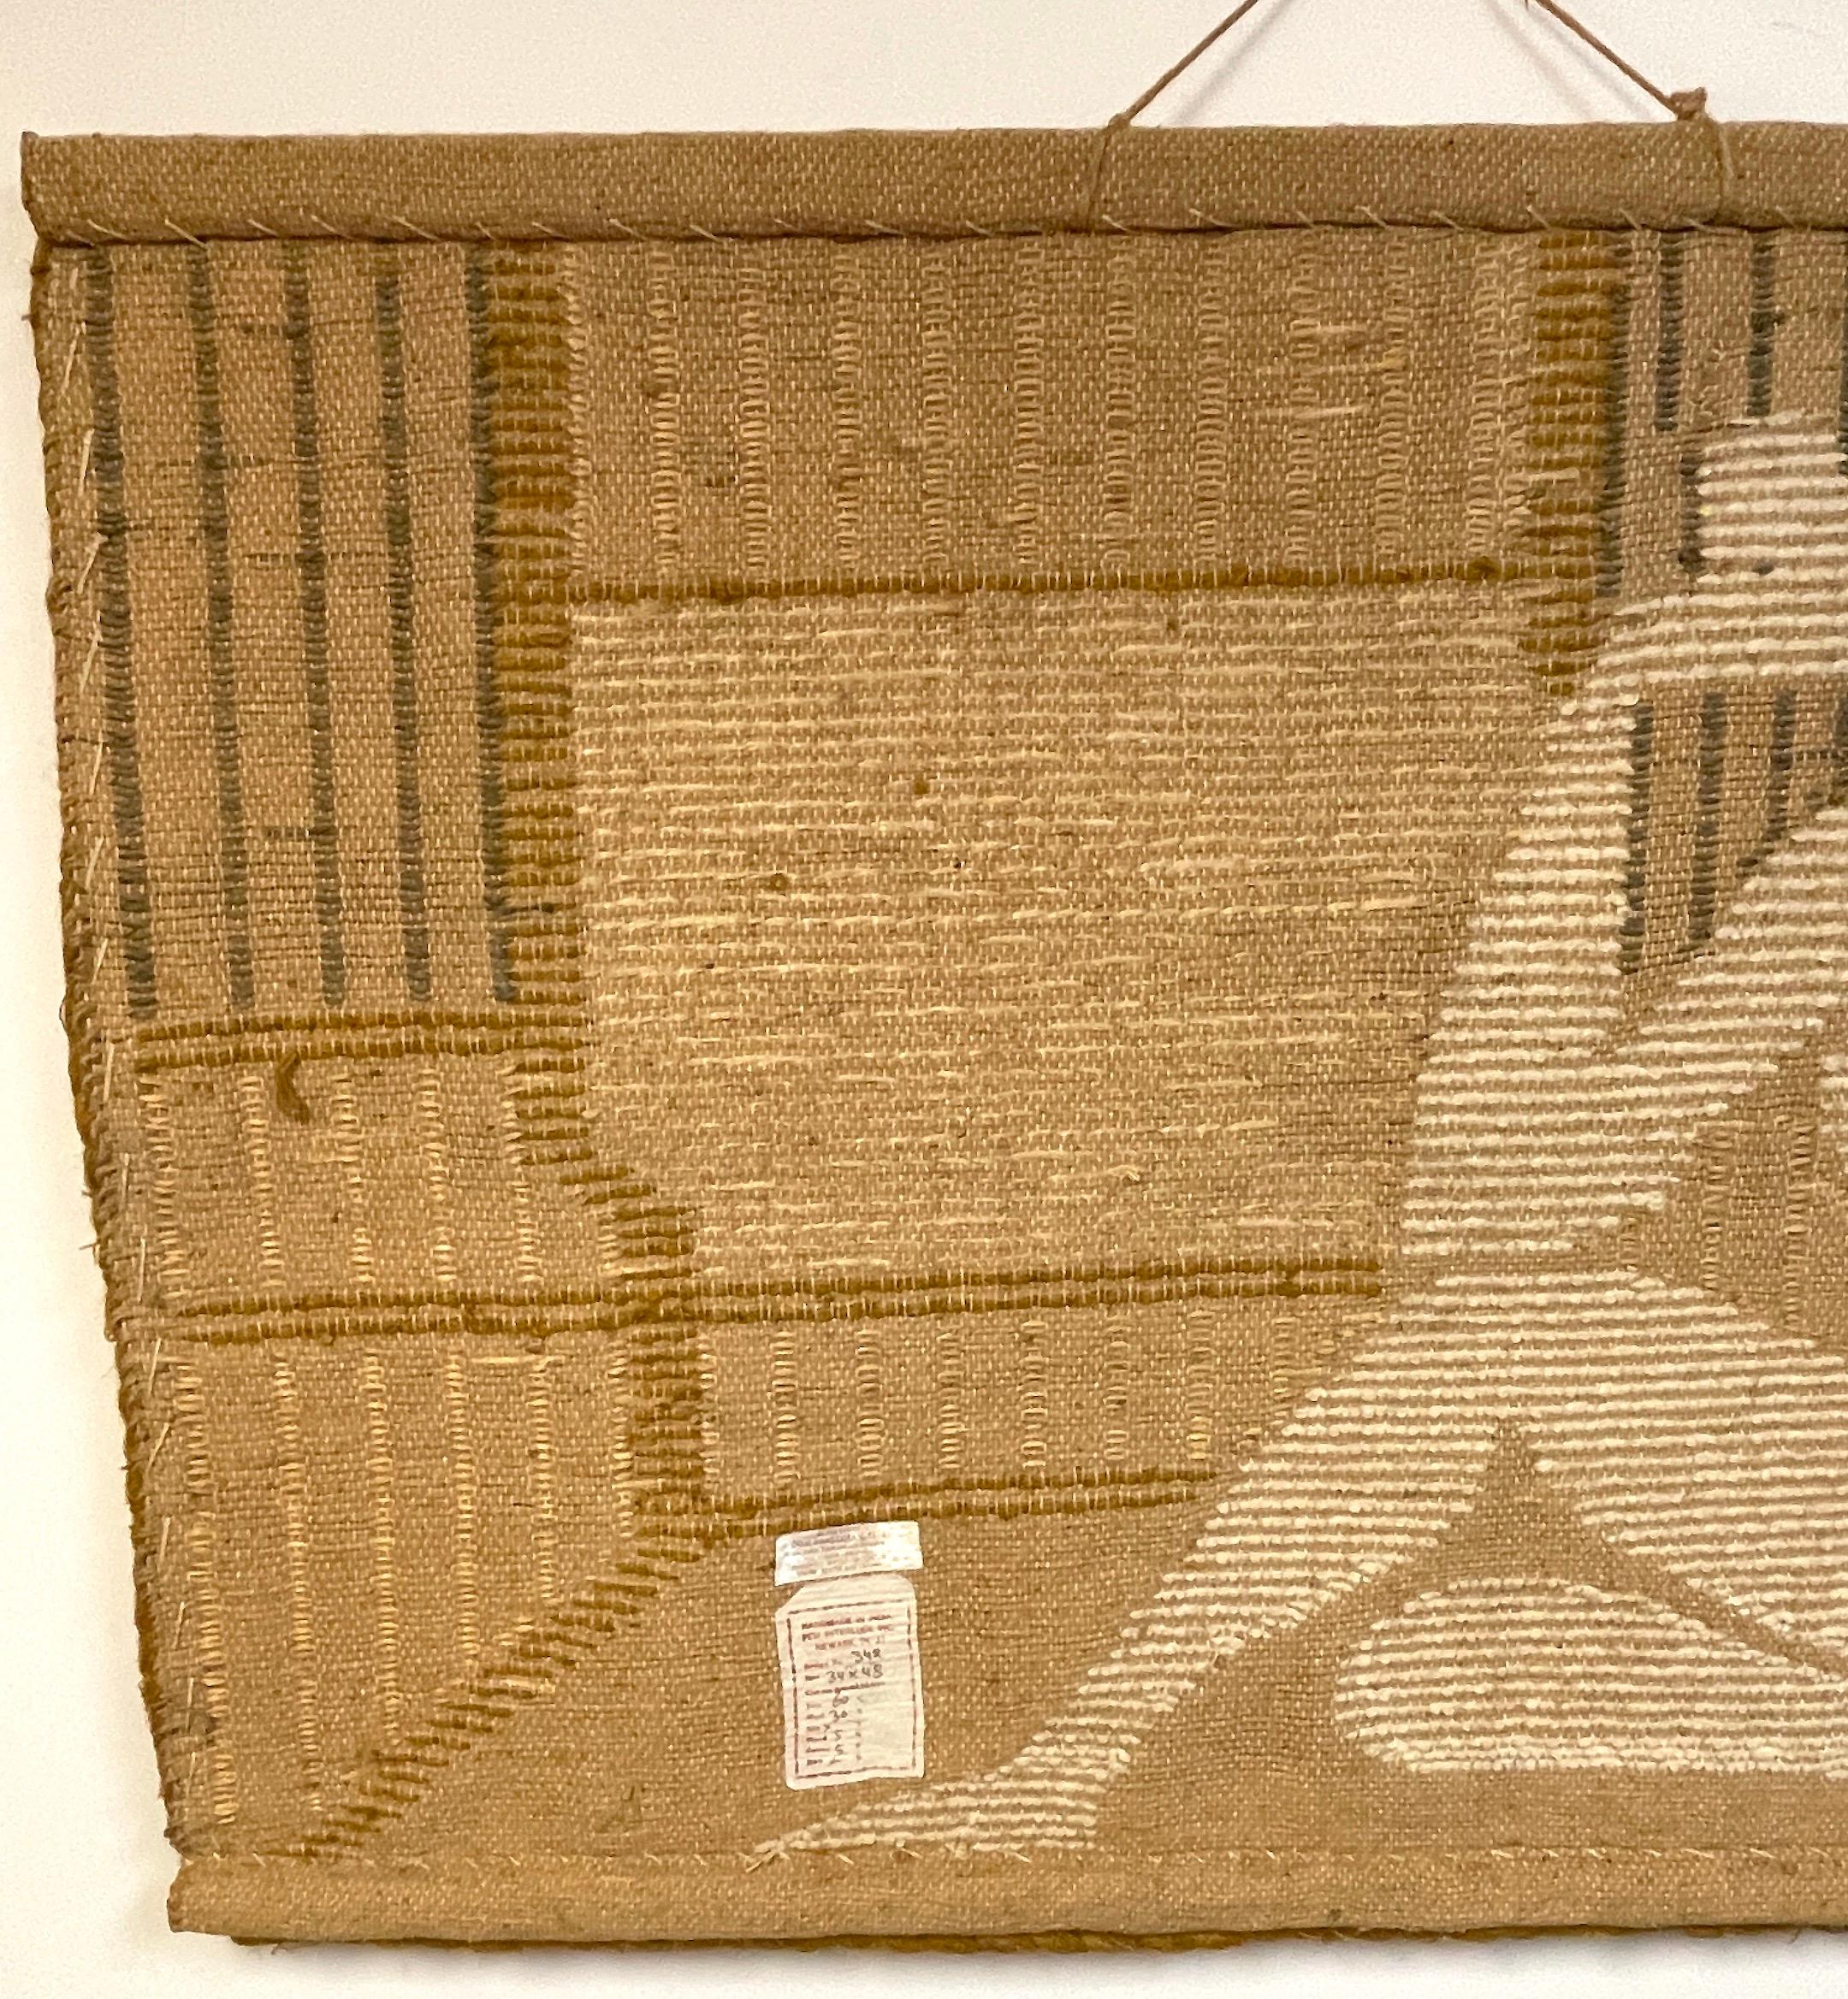 Natural Fiber Art Wall Tapestry 'Seated Nude' by Don Freedman, 1978 2